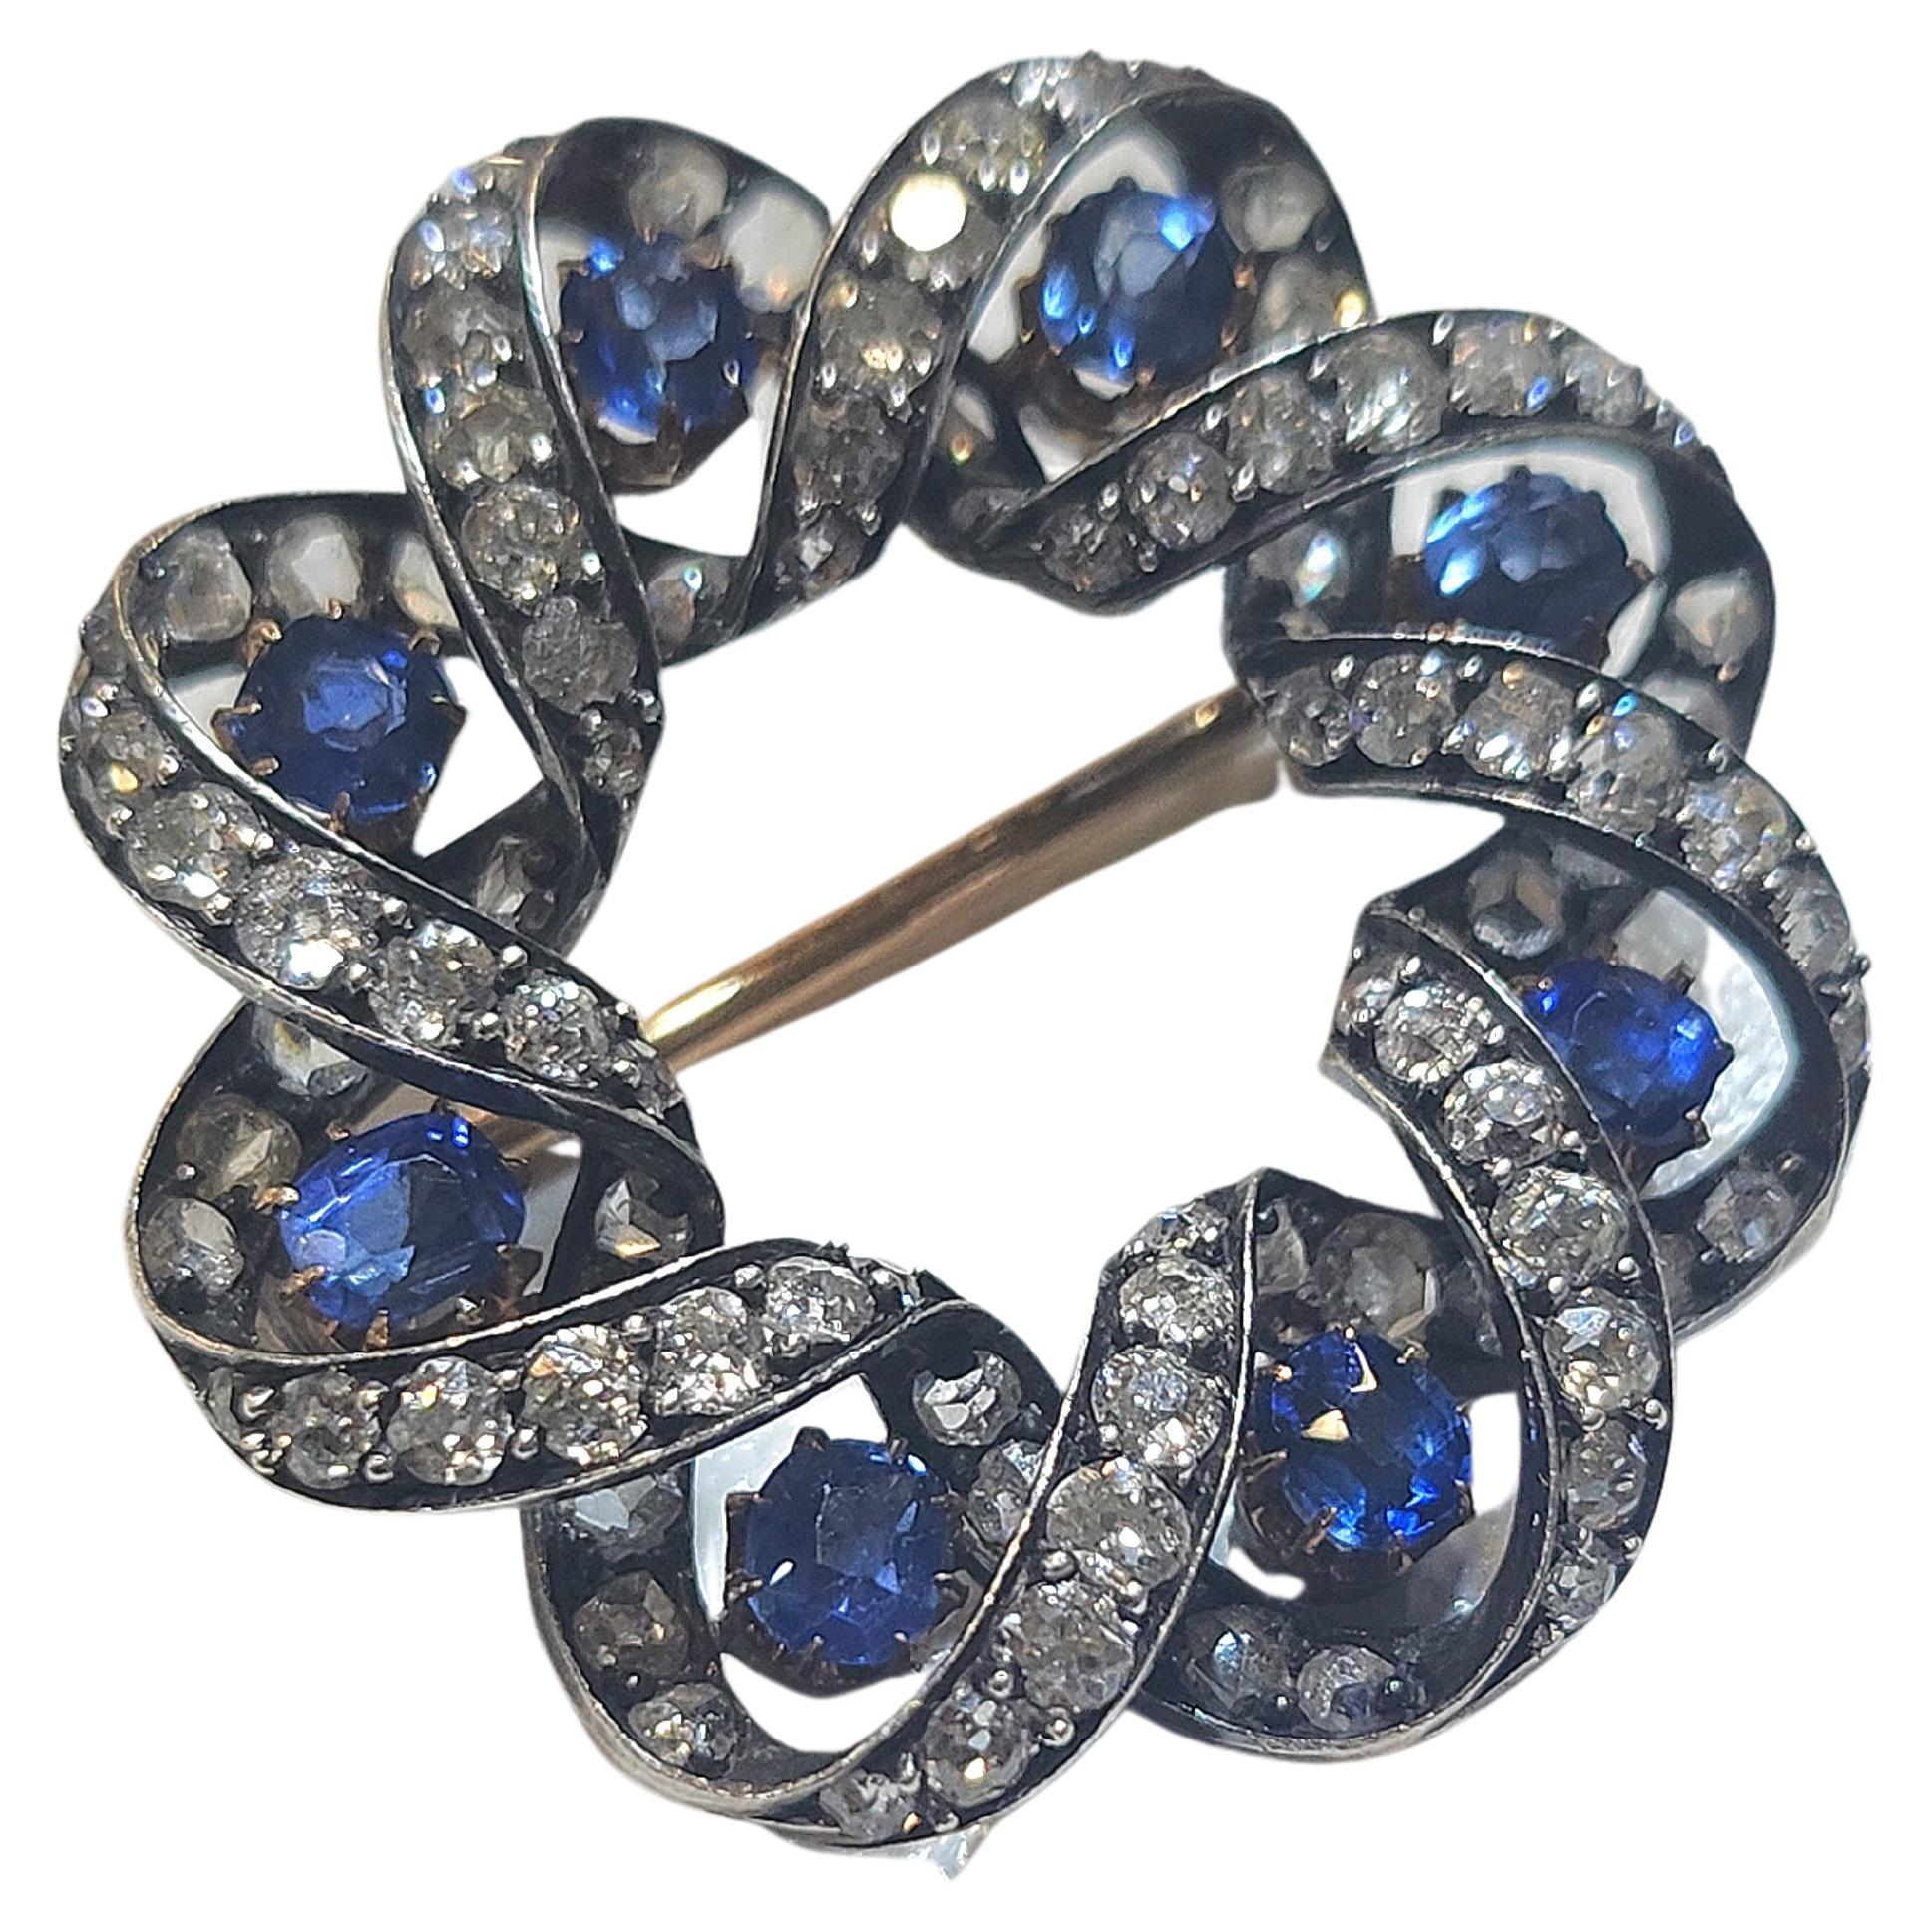 Antique brooch in circular designe gold topped with silver decorted with natural ceylon blue sapphire estimate weight of 1 carat and rose cut diamonds estimate weight 2 carats brooch diameter 3cm dates back to europe 1880/1899.c